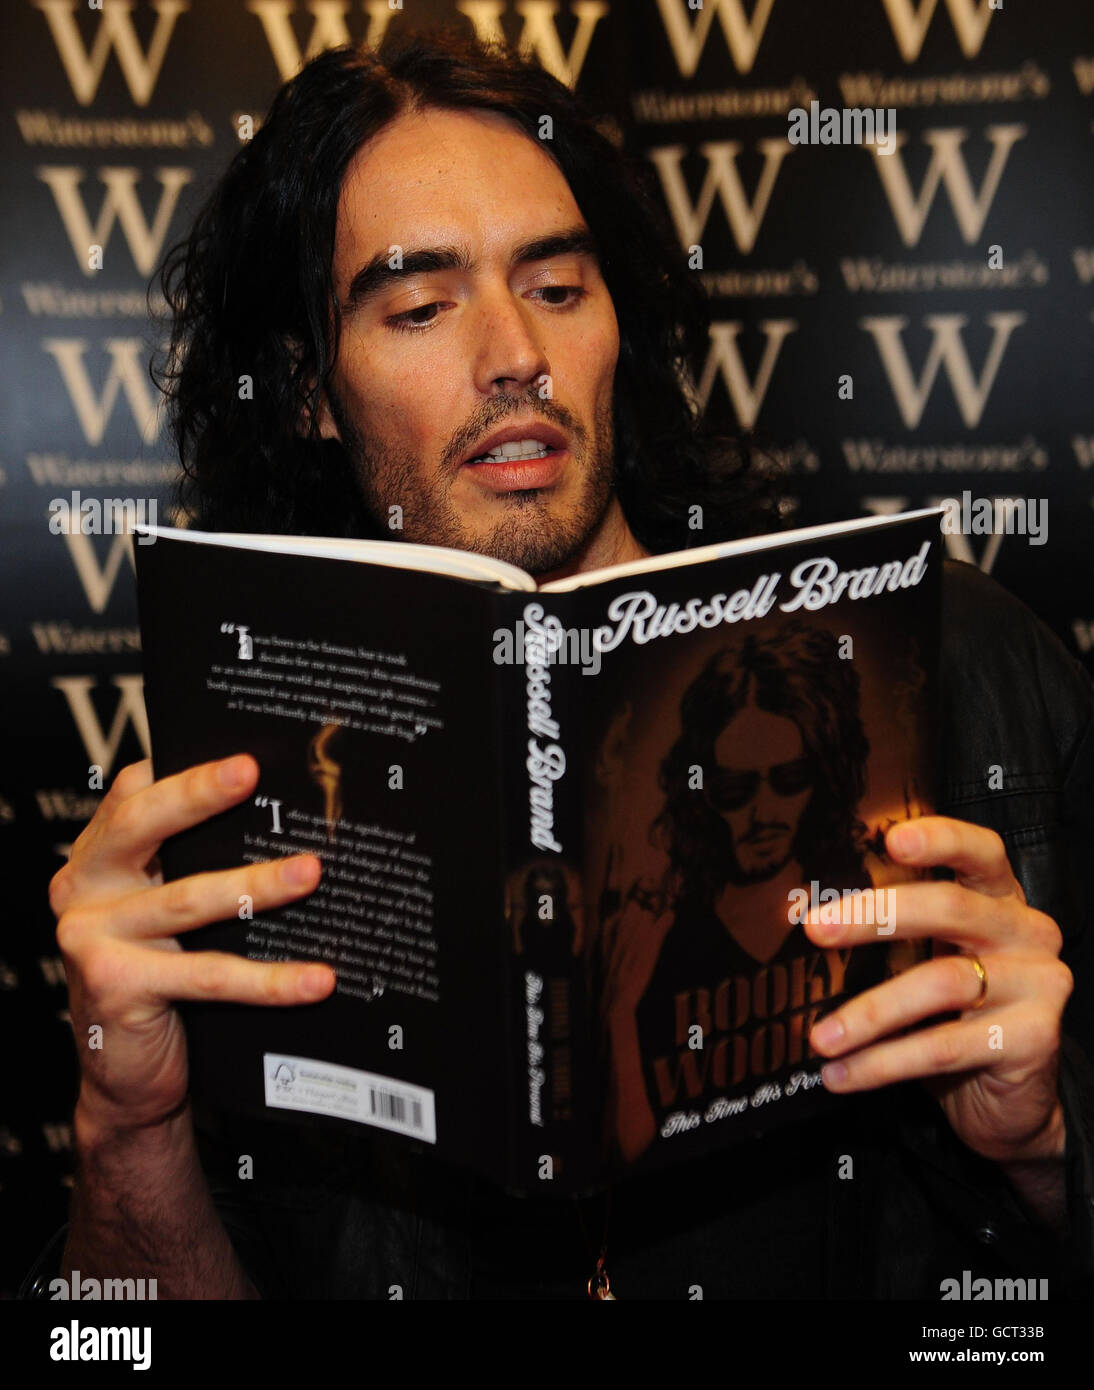 Russell Brand book signing - Gateshead. Booky Wook 2'. Stock Photo